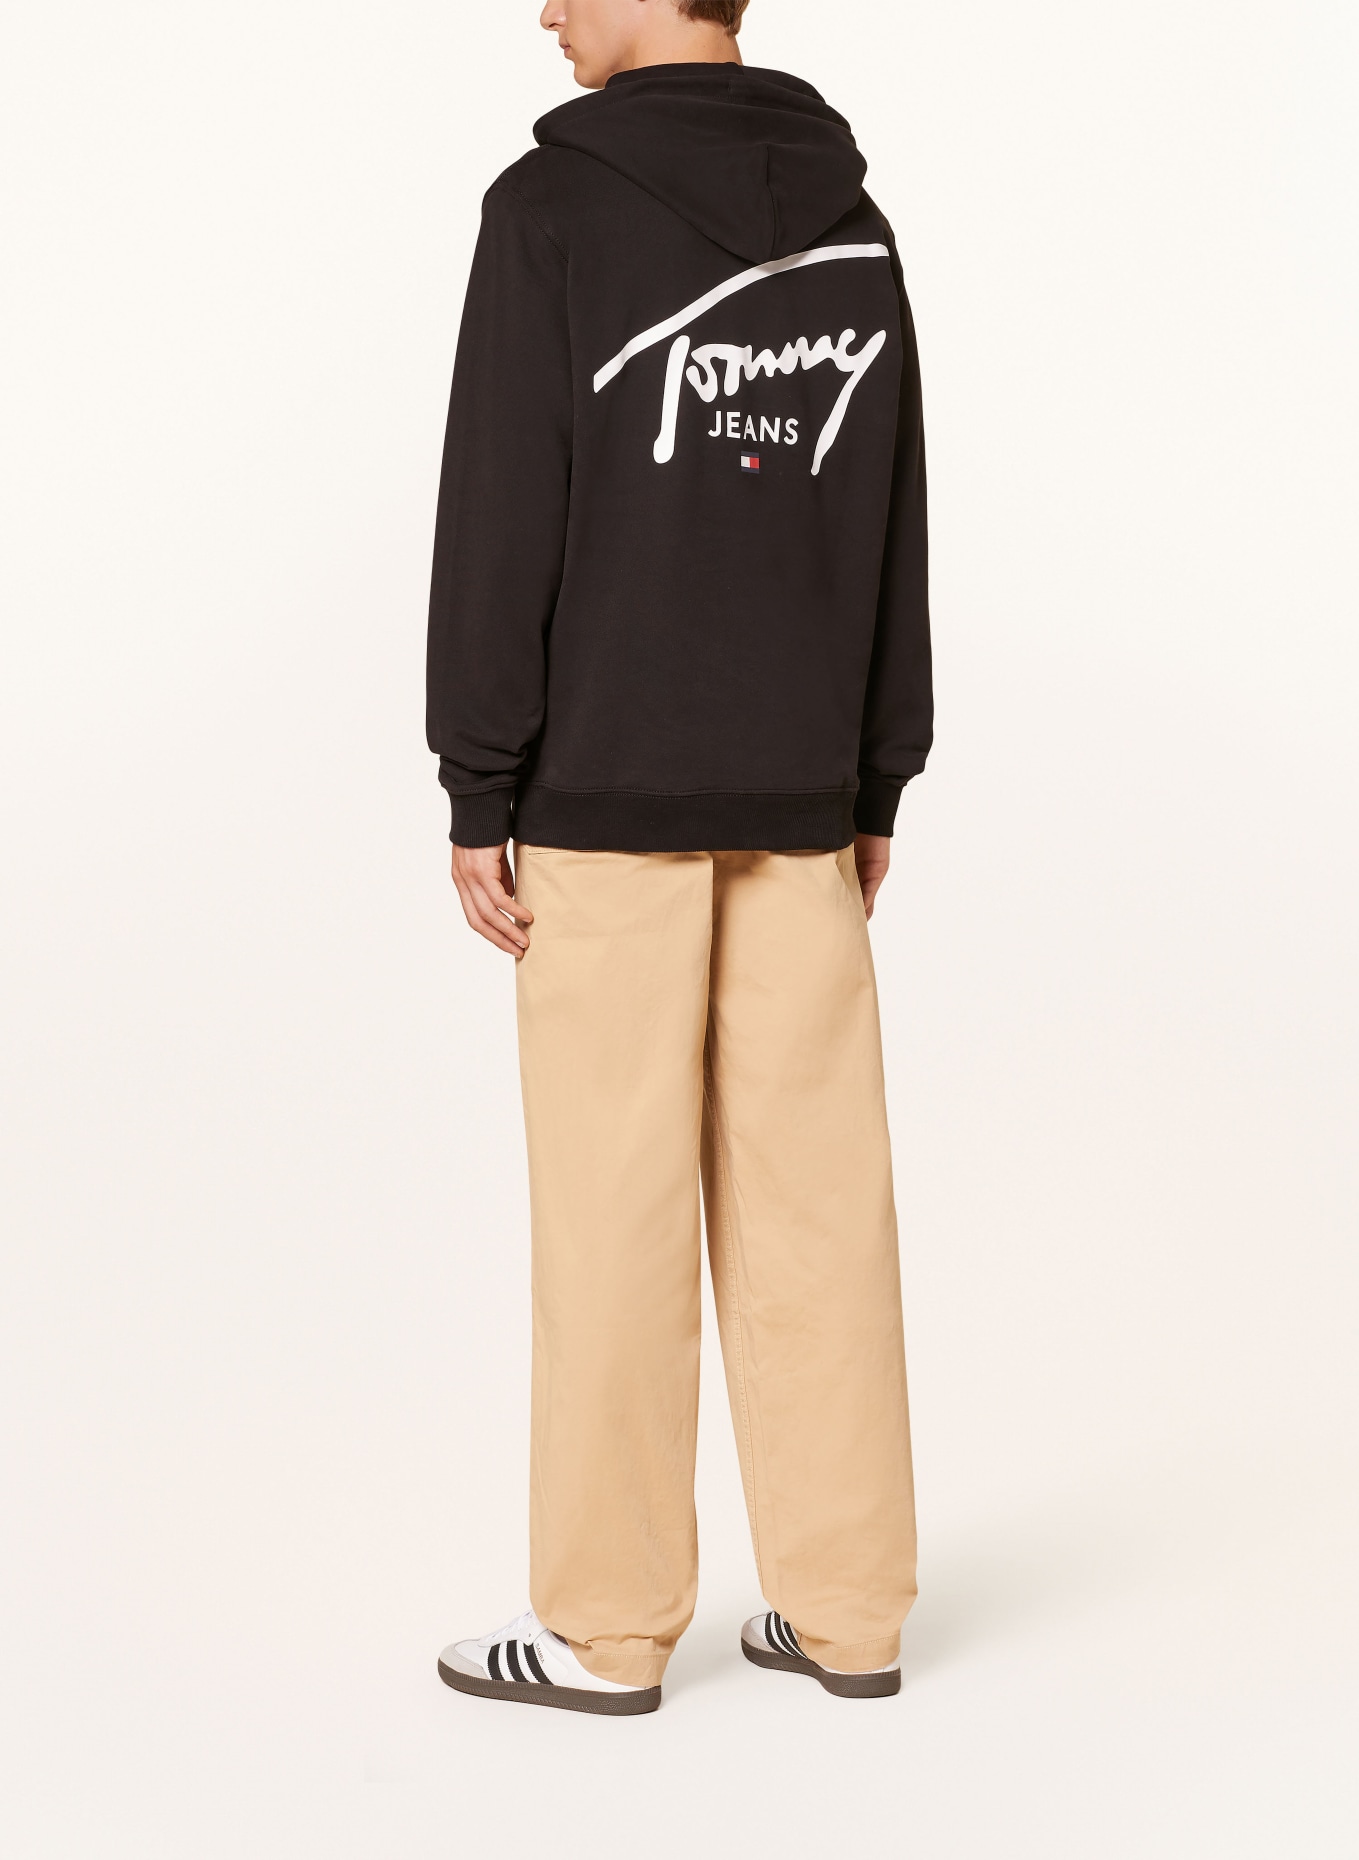 TOMMY JEANS Oversized hoodie, Color: BLACK (Image 2)